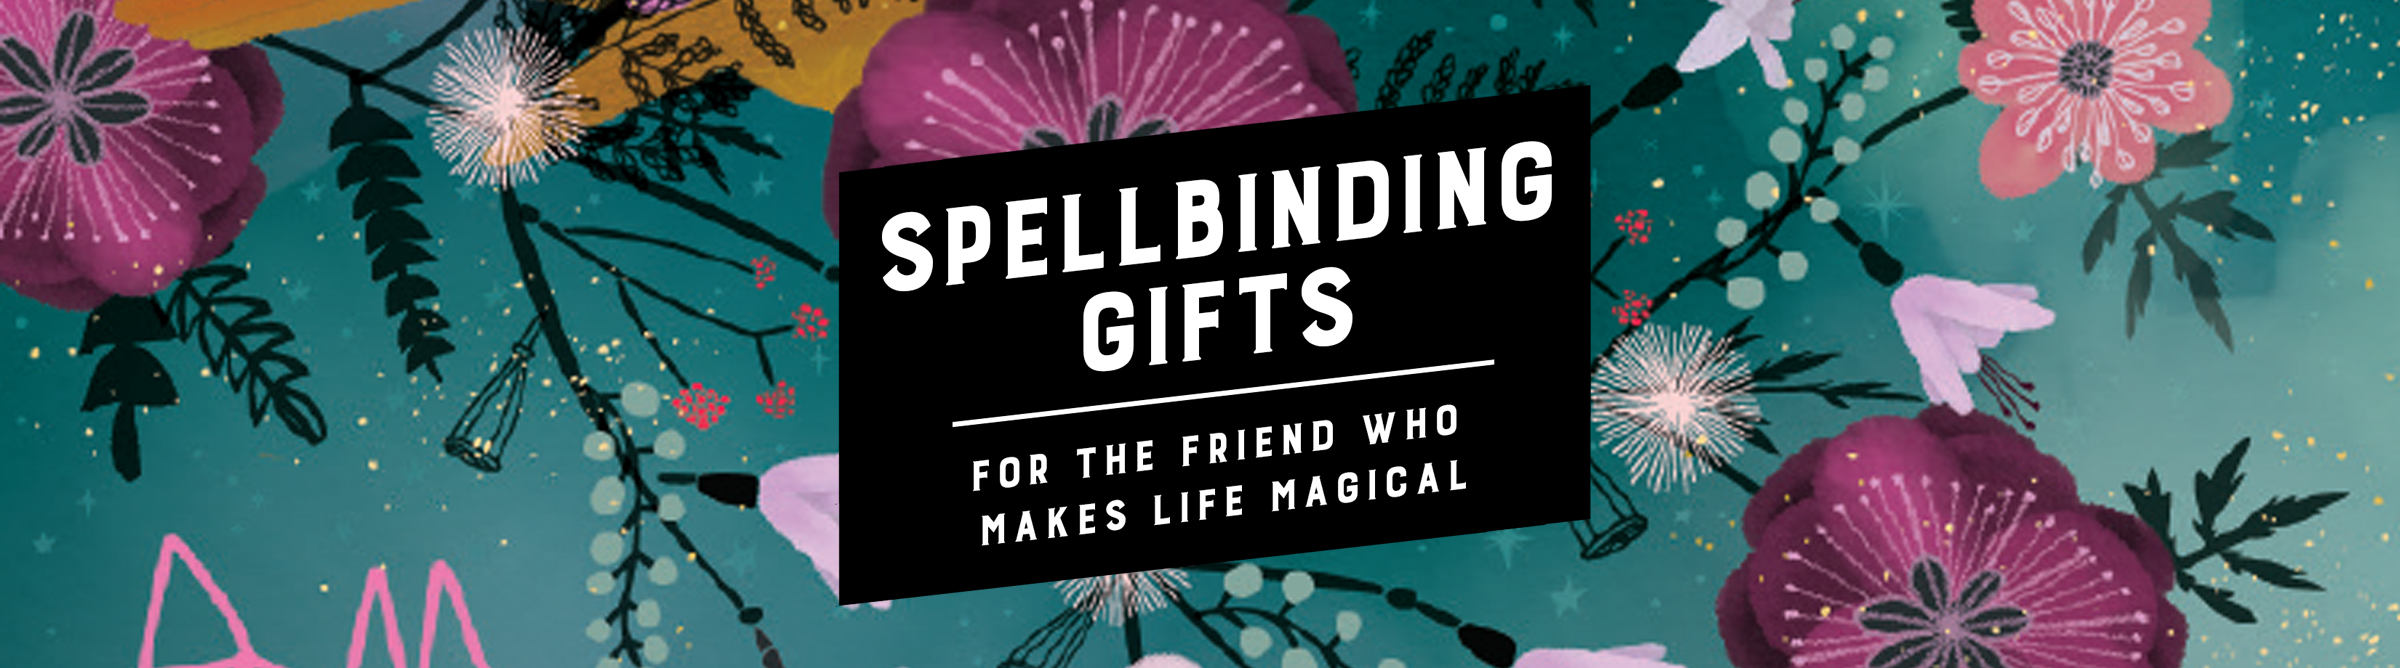 Spellbinding Gifts for the Friend Who Makes Life Magical